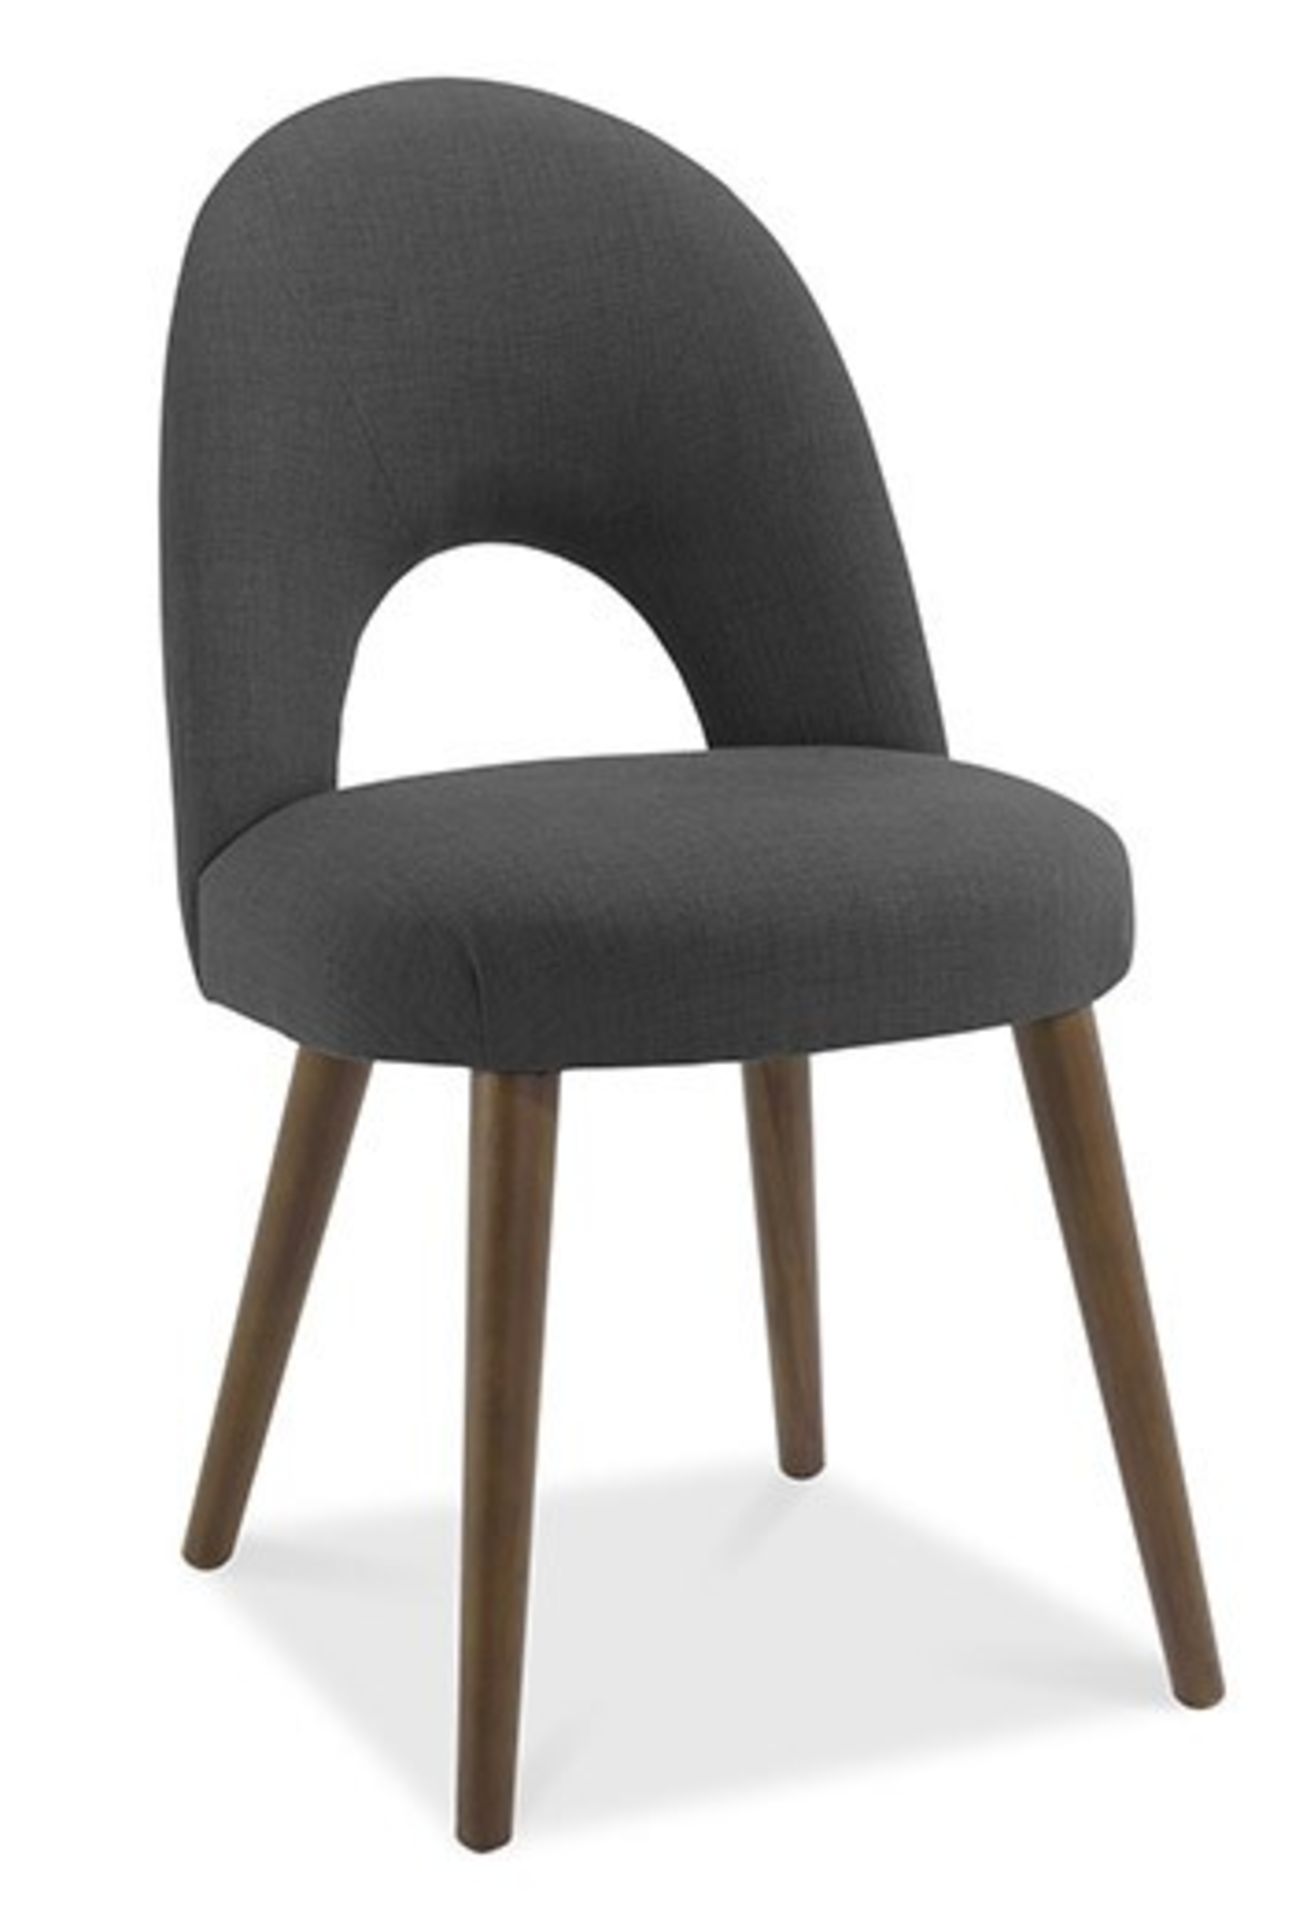 1 GRADE A BOXED INTERWOOD OSLO ARM CHAIR IN CHARCOAL / RRP £198.00 (VIEWING HIGHLY RECOMMENDED)